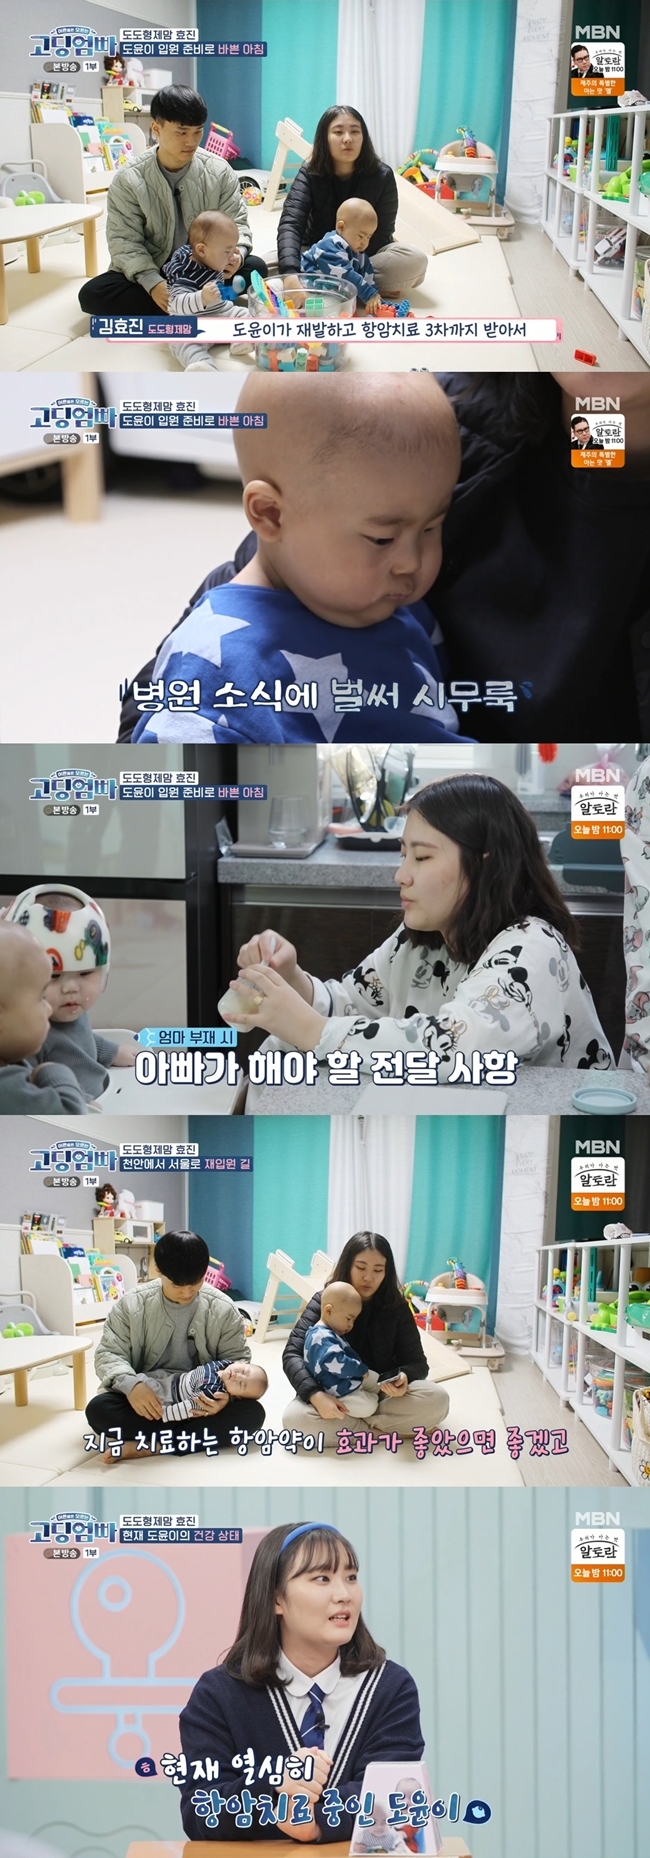 Kim Hyo-jin big son Doyun re-enters Hospital for chemotherapyOn April 2, MBN high school mom dad, two son-mam Kim Hyo-jin daily life was drawn.Kim Hyo-jin has revealed the story of a big son Doyun who is suffering from cancer due to rhabdomyosarcoma, but recently Doyun has a tumor metastasized to his face and thigh and has to be removed again.Kim Hyo-jin said, Doyun is recurred and received until the third stage of chemotherapy, so it is necessary to test it to plan the treatment in the future. According to the results of the MRI test, Doyun will have surgery to remove the recurrent tumor on the face and the metastatic thigh tumor. Before Son Doyun was re-admissioned, Kim Hyo-jin started a busy morning, feeding her own baby food and packing up the necessary luggage.Doyun seemed to know that he had to go to Hospital, and he was more saddened.Kim Hyo-jin carefully wrote down what he needed for Doyun and Husband to stay at home before leaving, and second son.Park Mi-sun said, I hope Hyo-jin will come in with the same daughter-in-law.Kim Hyo-jin Family moved to Seoul to re-enter sonKim Hyo-jin said, I hope that the anticancer drug that I treat now will be effective and I hope that the test results will be good and I will hear that the treatment will flow in a good direction.Kim Hyo-jin, who watched VCR, said in a studio interview, I have been told that the tumor has been reduced because of the effect of chemotherapy so far.In principle, he said that surgery is not possible when it recurs or spreads far. Doyun has been treated since he was a child and said that surgery is likely to be possible, not thigh bones.There is no way to do this surgery, he said.